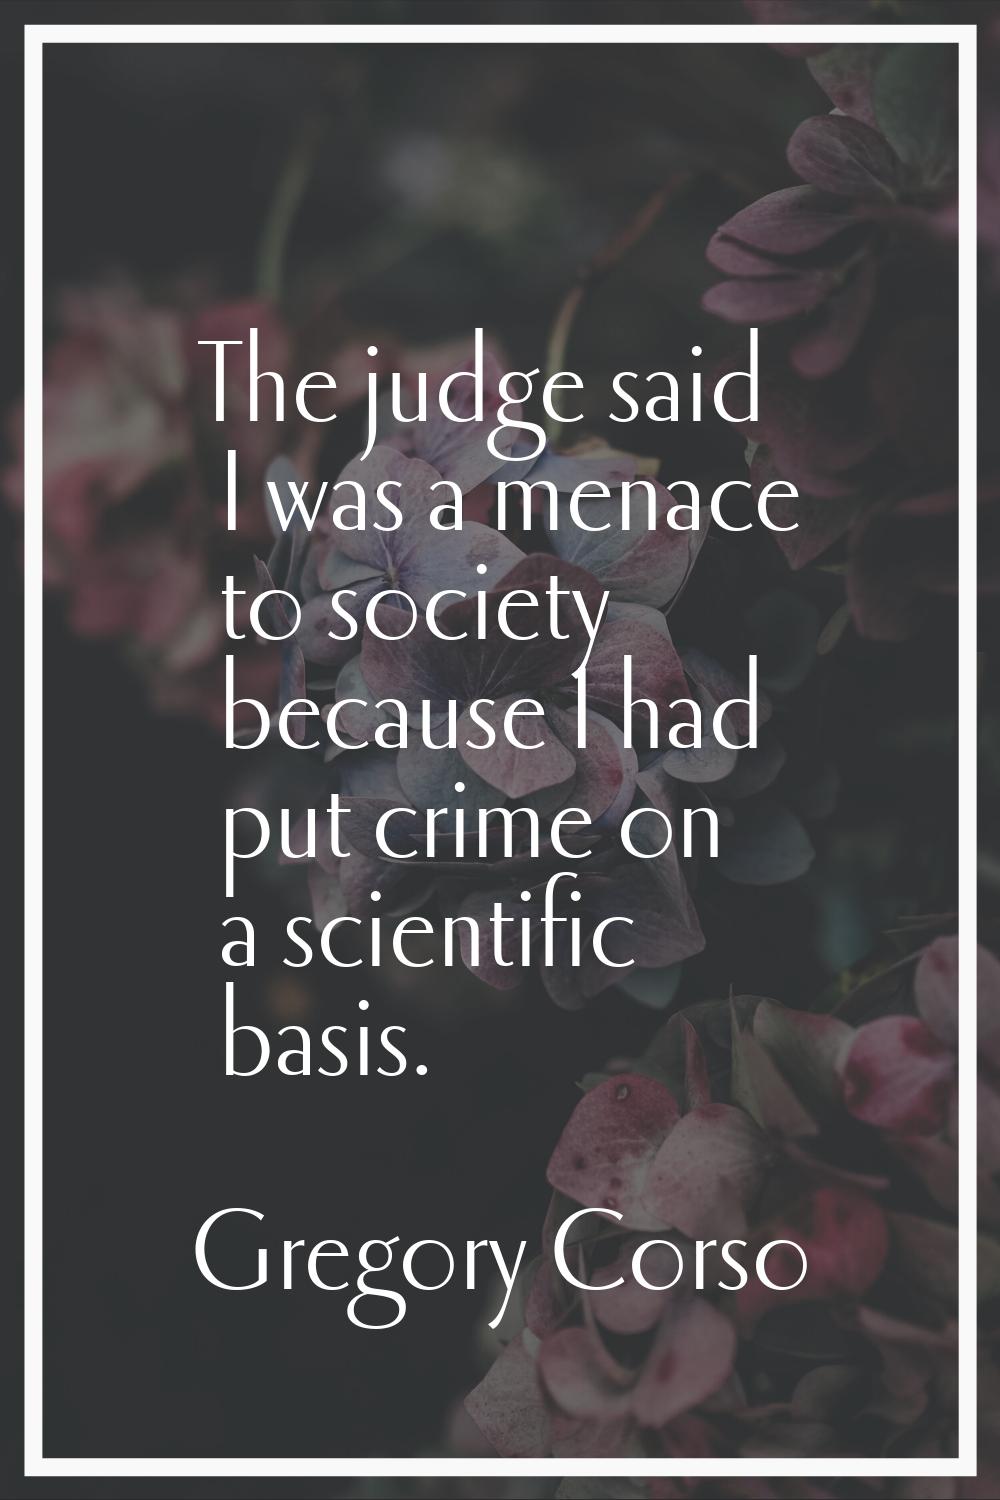 The judge said I was a menace to society because I had put crime on a scientific basis.